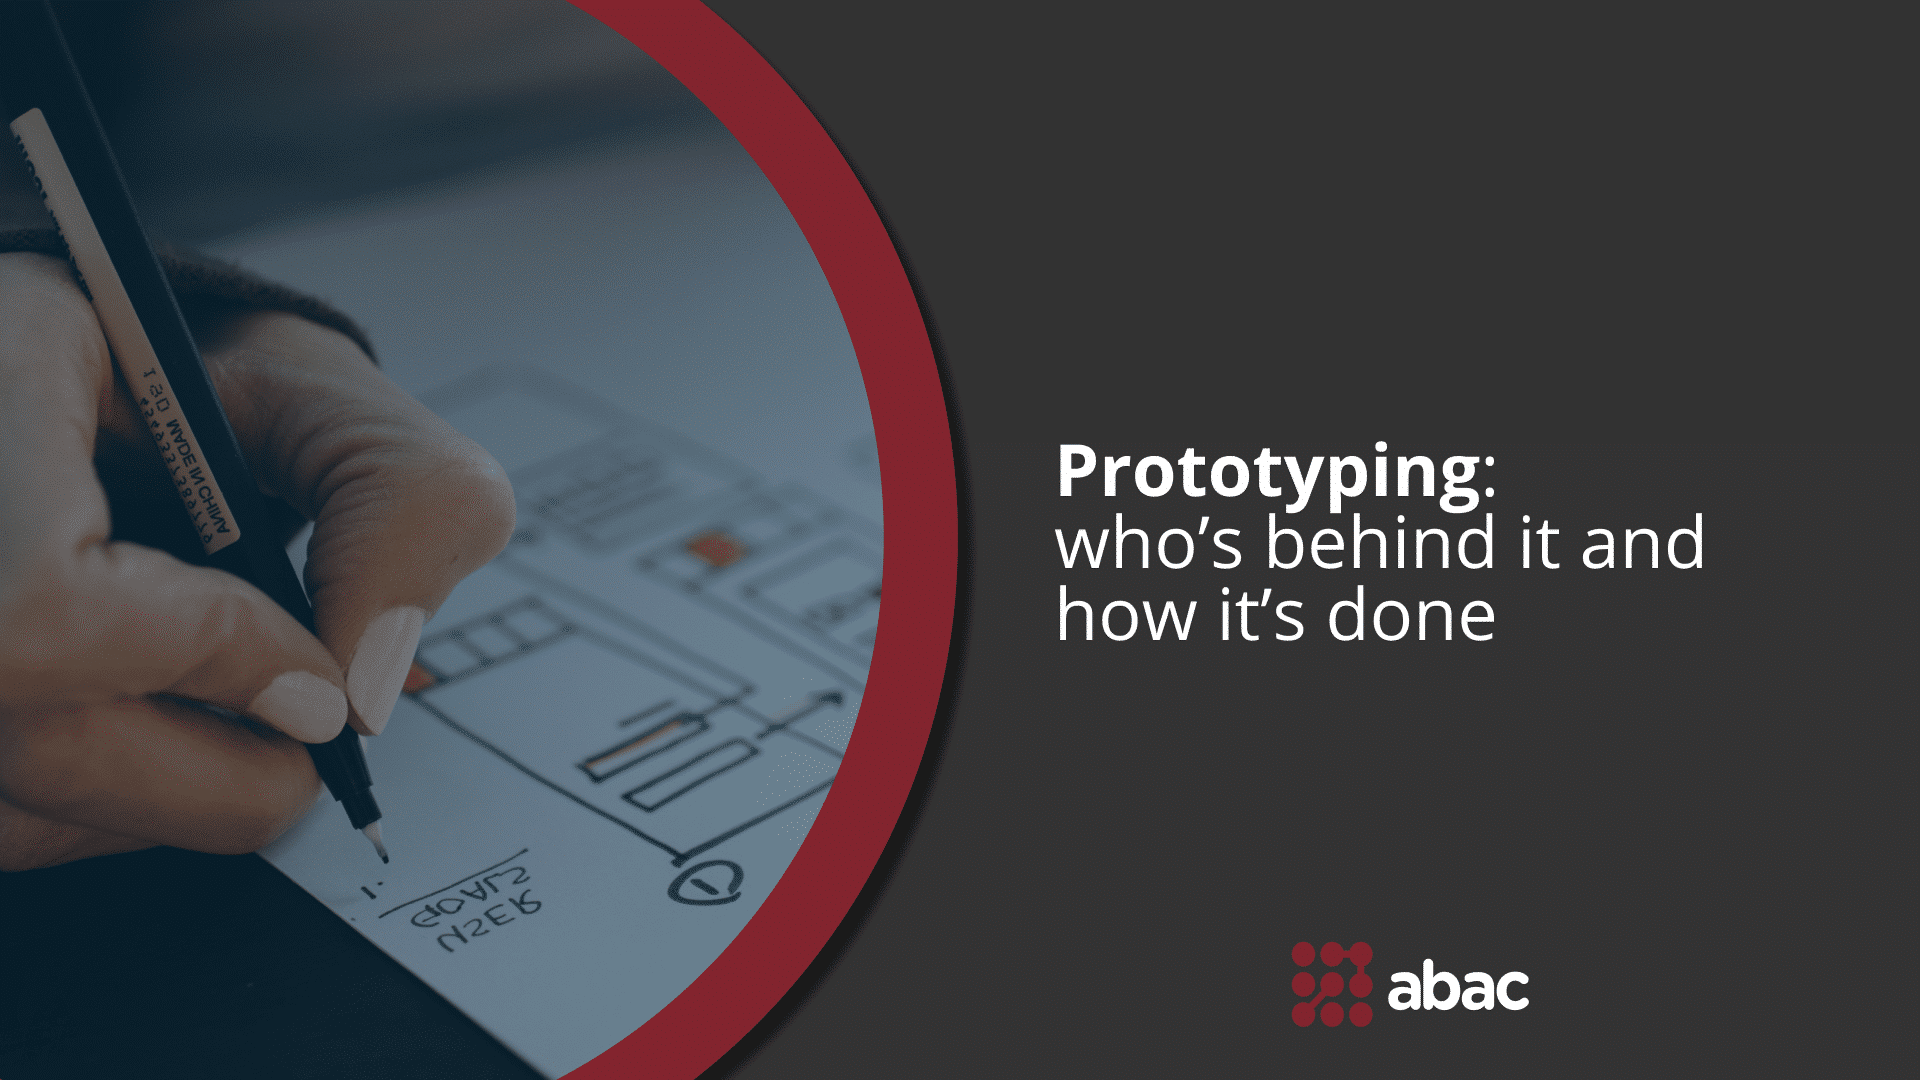 Prototyping: who’s behind it and how it’s done